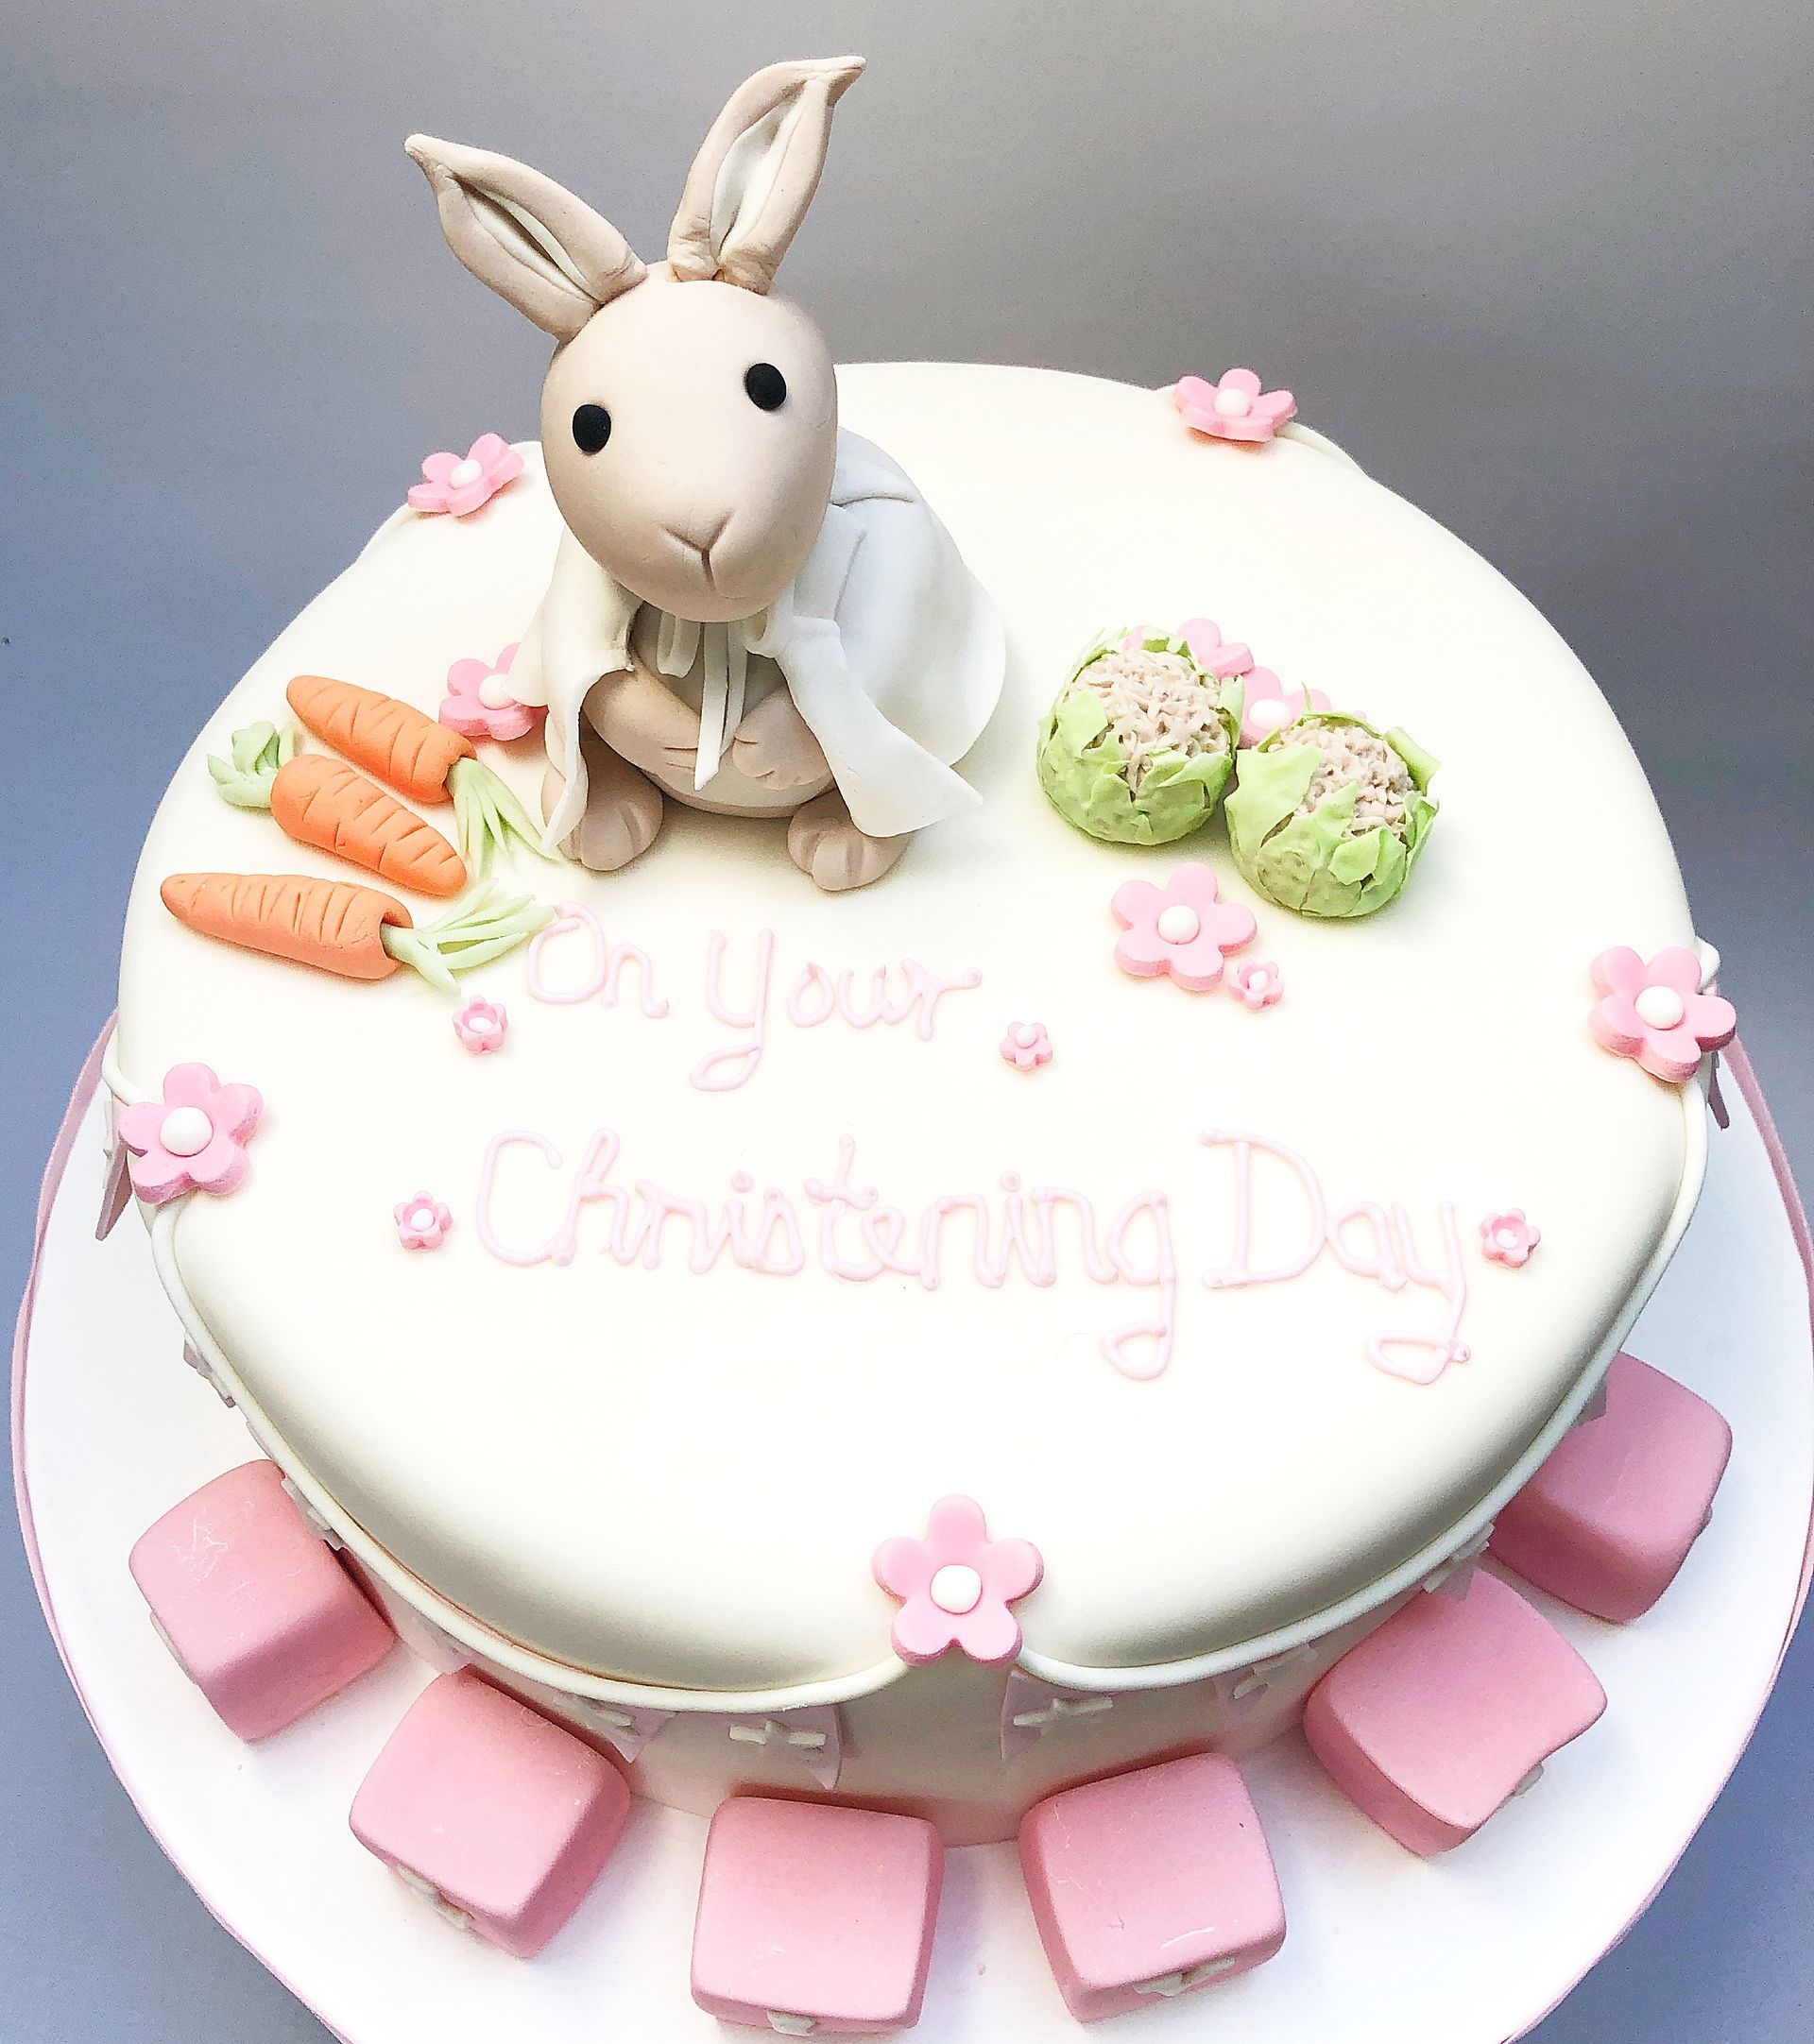 Fondant covered Christening cake with a  Peter Rabbit theme. A fondant rabbit, carrots, cauliflowers, and flowers are used to decorate the cake.